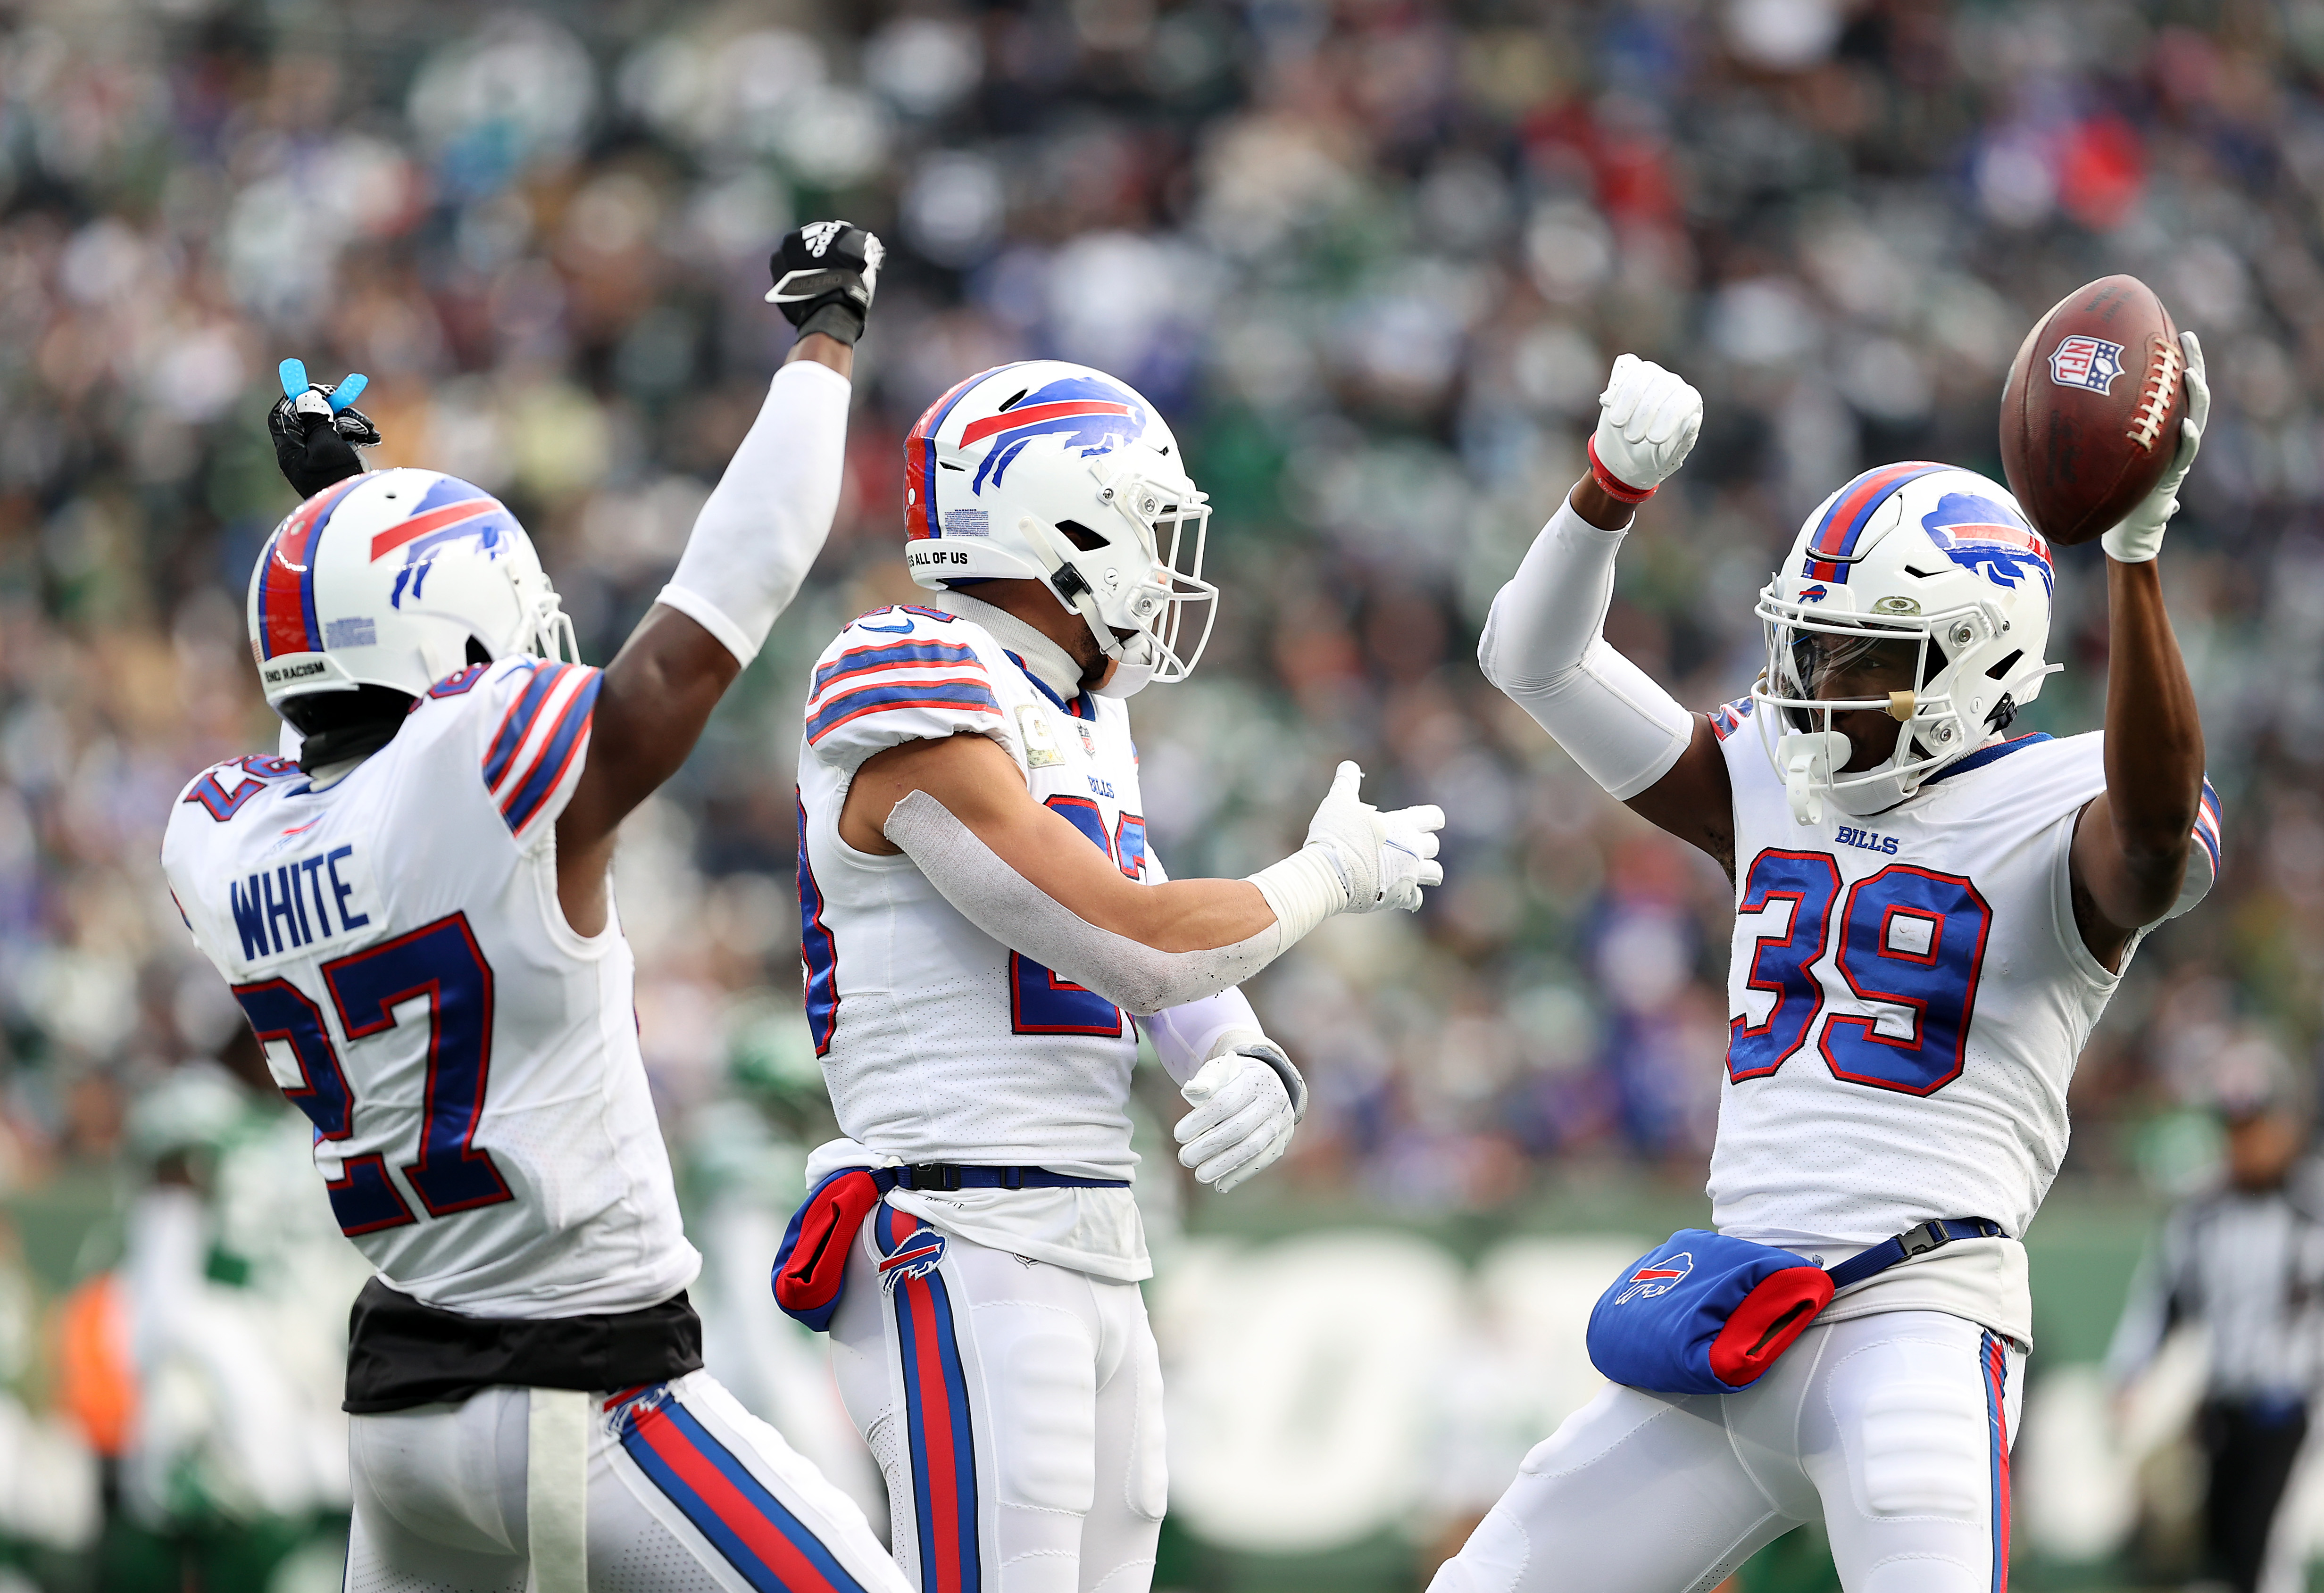 Bills CB Tre'Davious White out for season with torn ACL